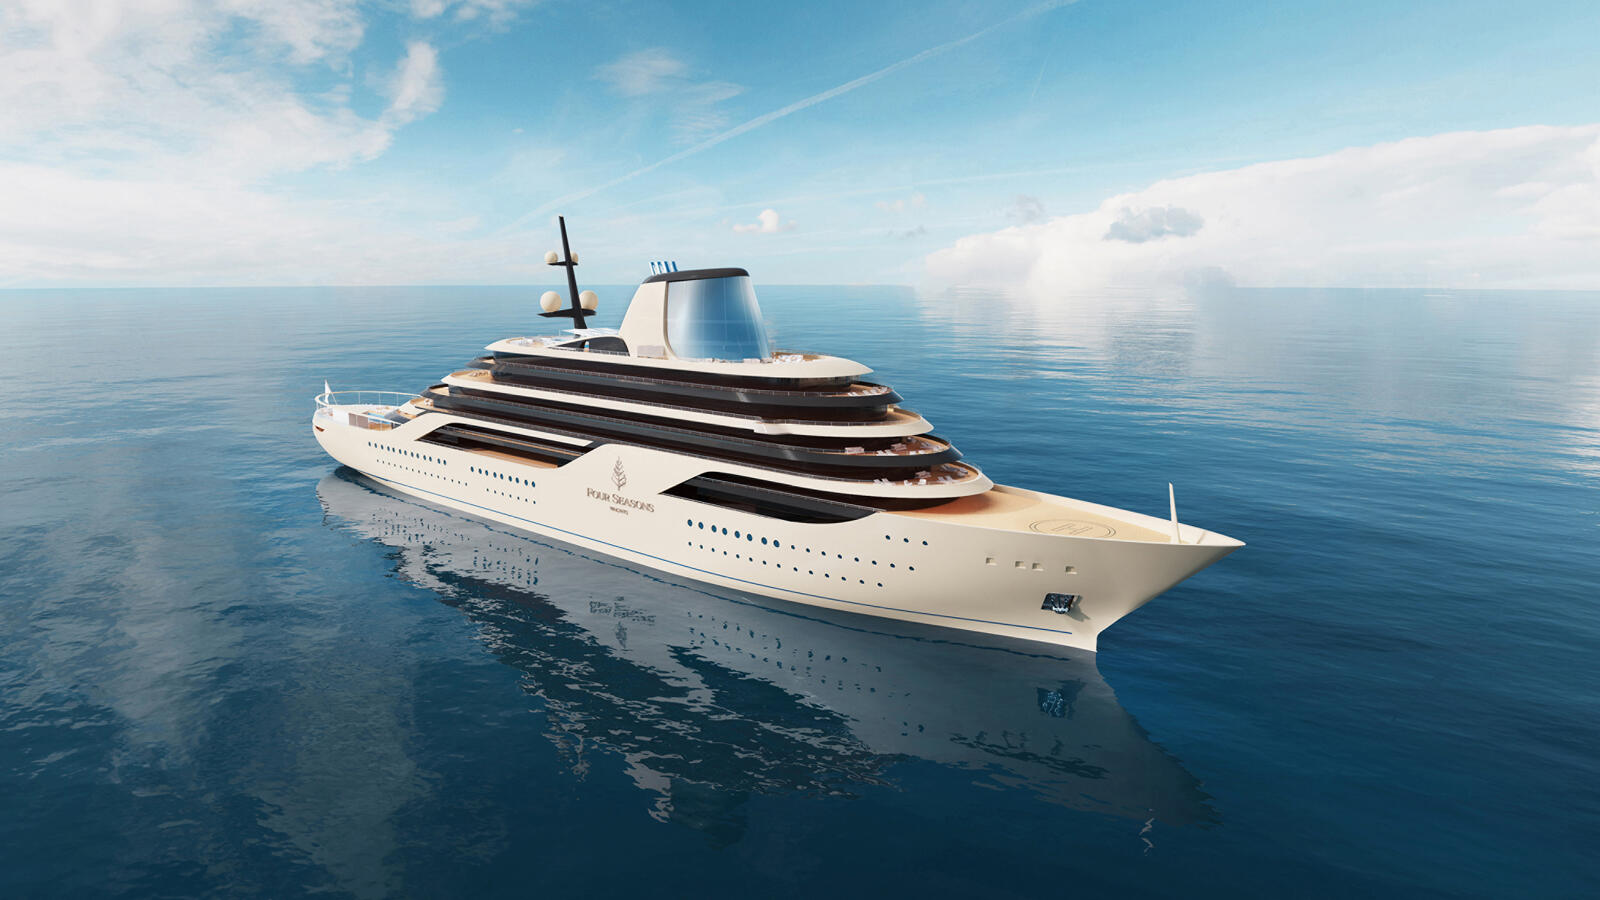 Rendering of Four Seasons Yachts upcoming vessel (Photo/Four Seasons Yachts)